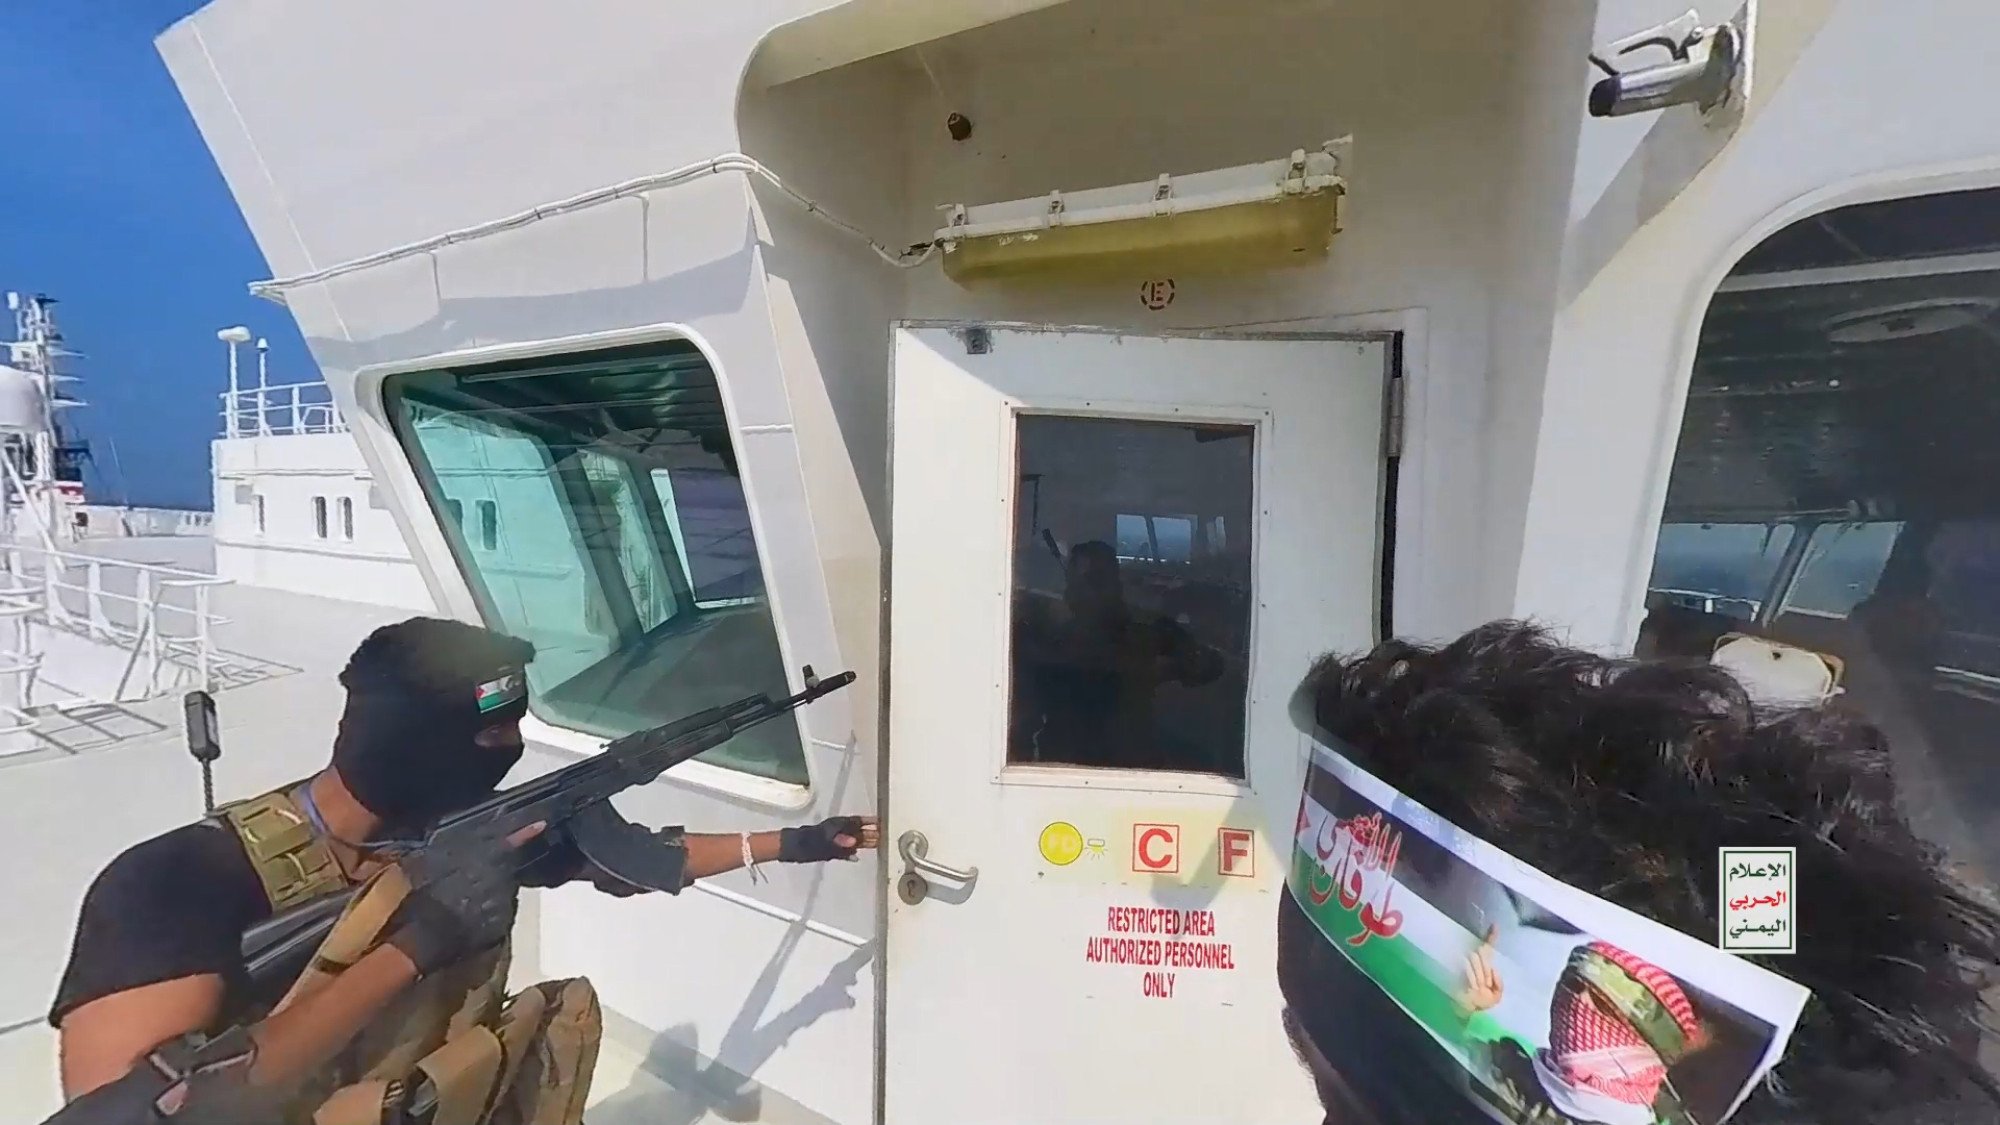 helicopter-borne houthi attack on galaxy leader cargo ship raises risks in crucial red sea